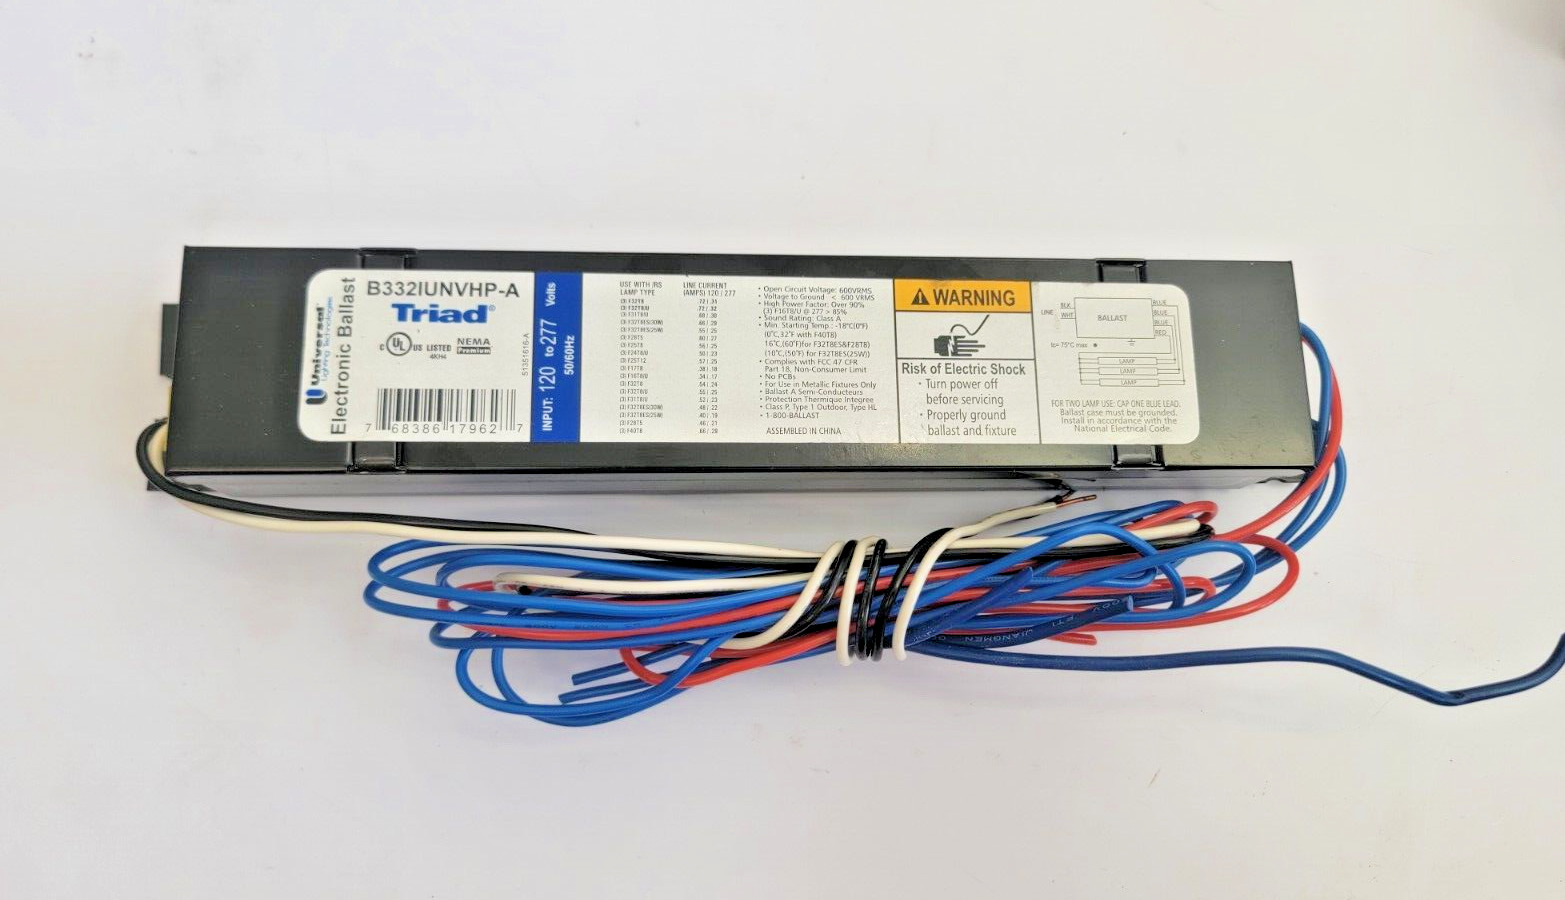 Universal B332IUNVHP-A010C Electronic Ballast for (2 or 3) F32T8 Lamps